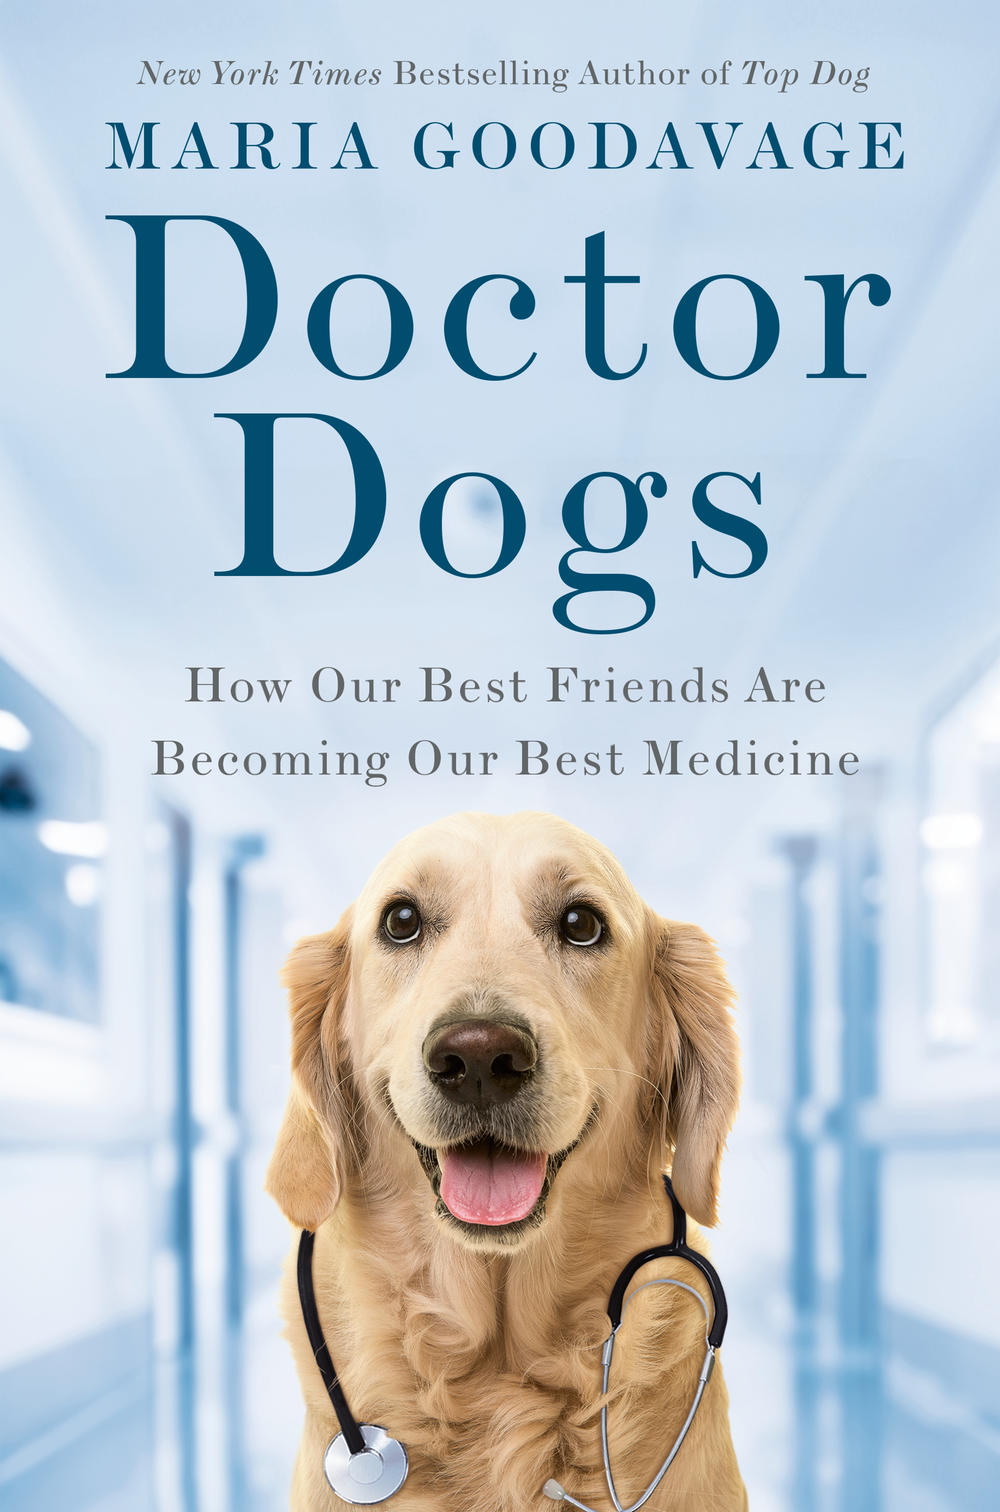 Maria Goodavage writes about breakthroughs with medical dogs in her book 'Doctor Dogs'.